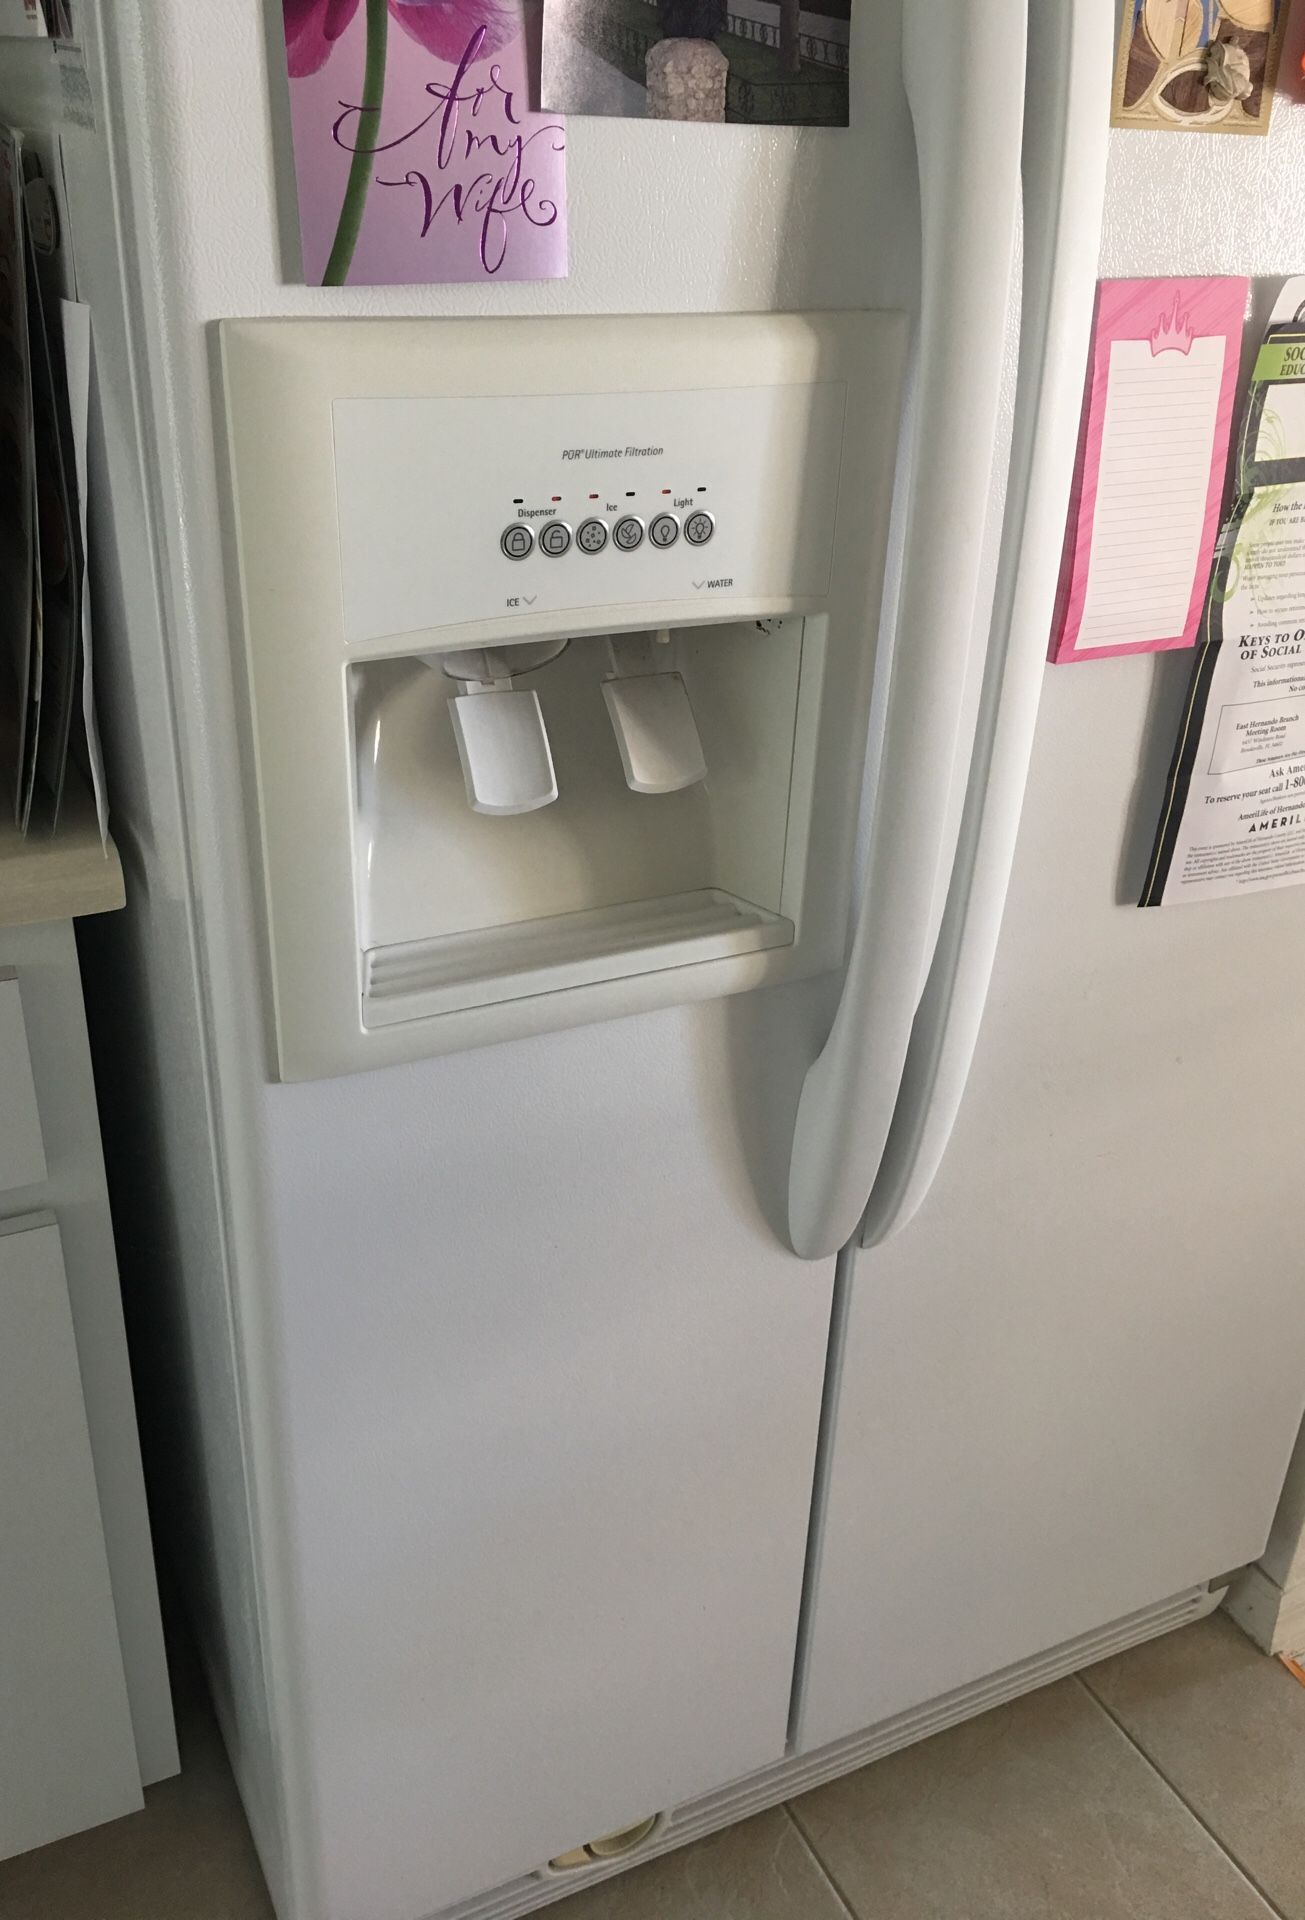 Kenmore refrigerator white color it is a very good condition works good can deliver to you house changes $60 if it is close to Hudson